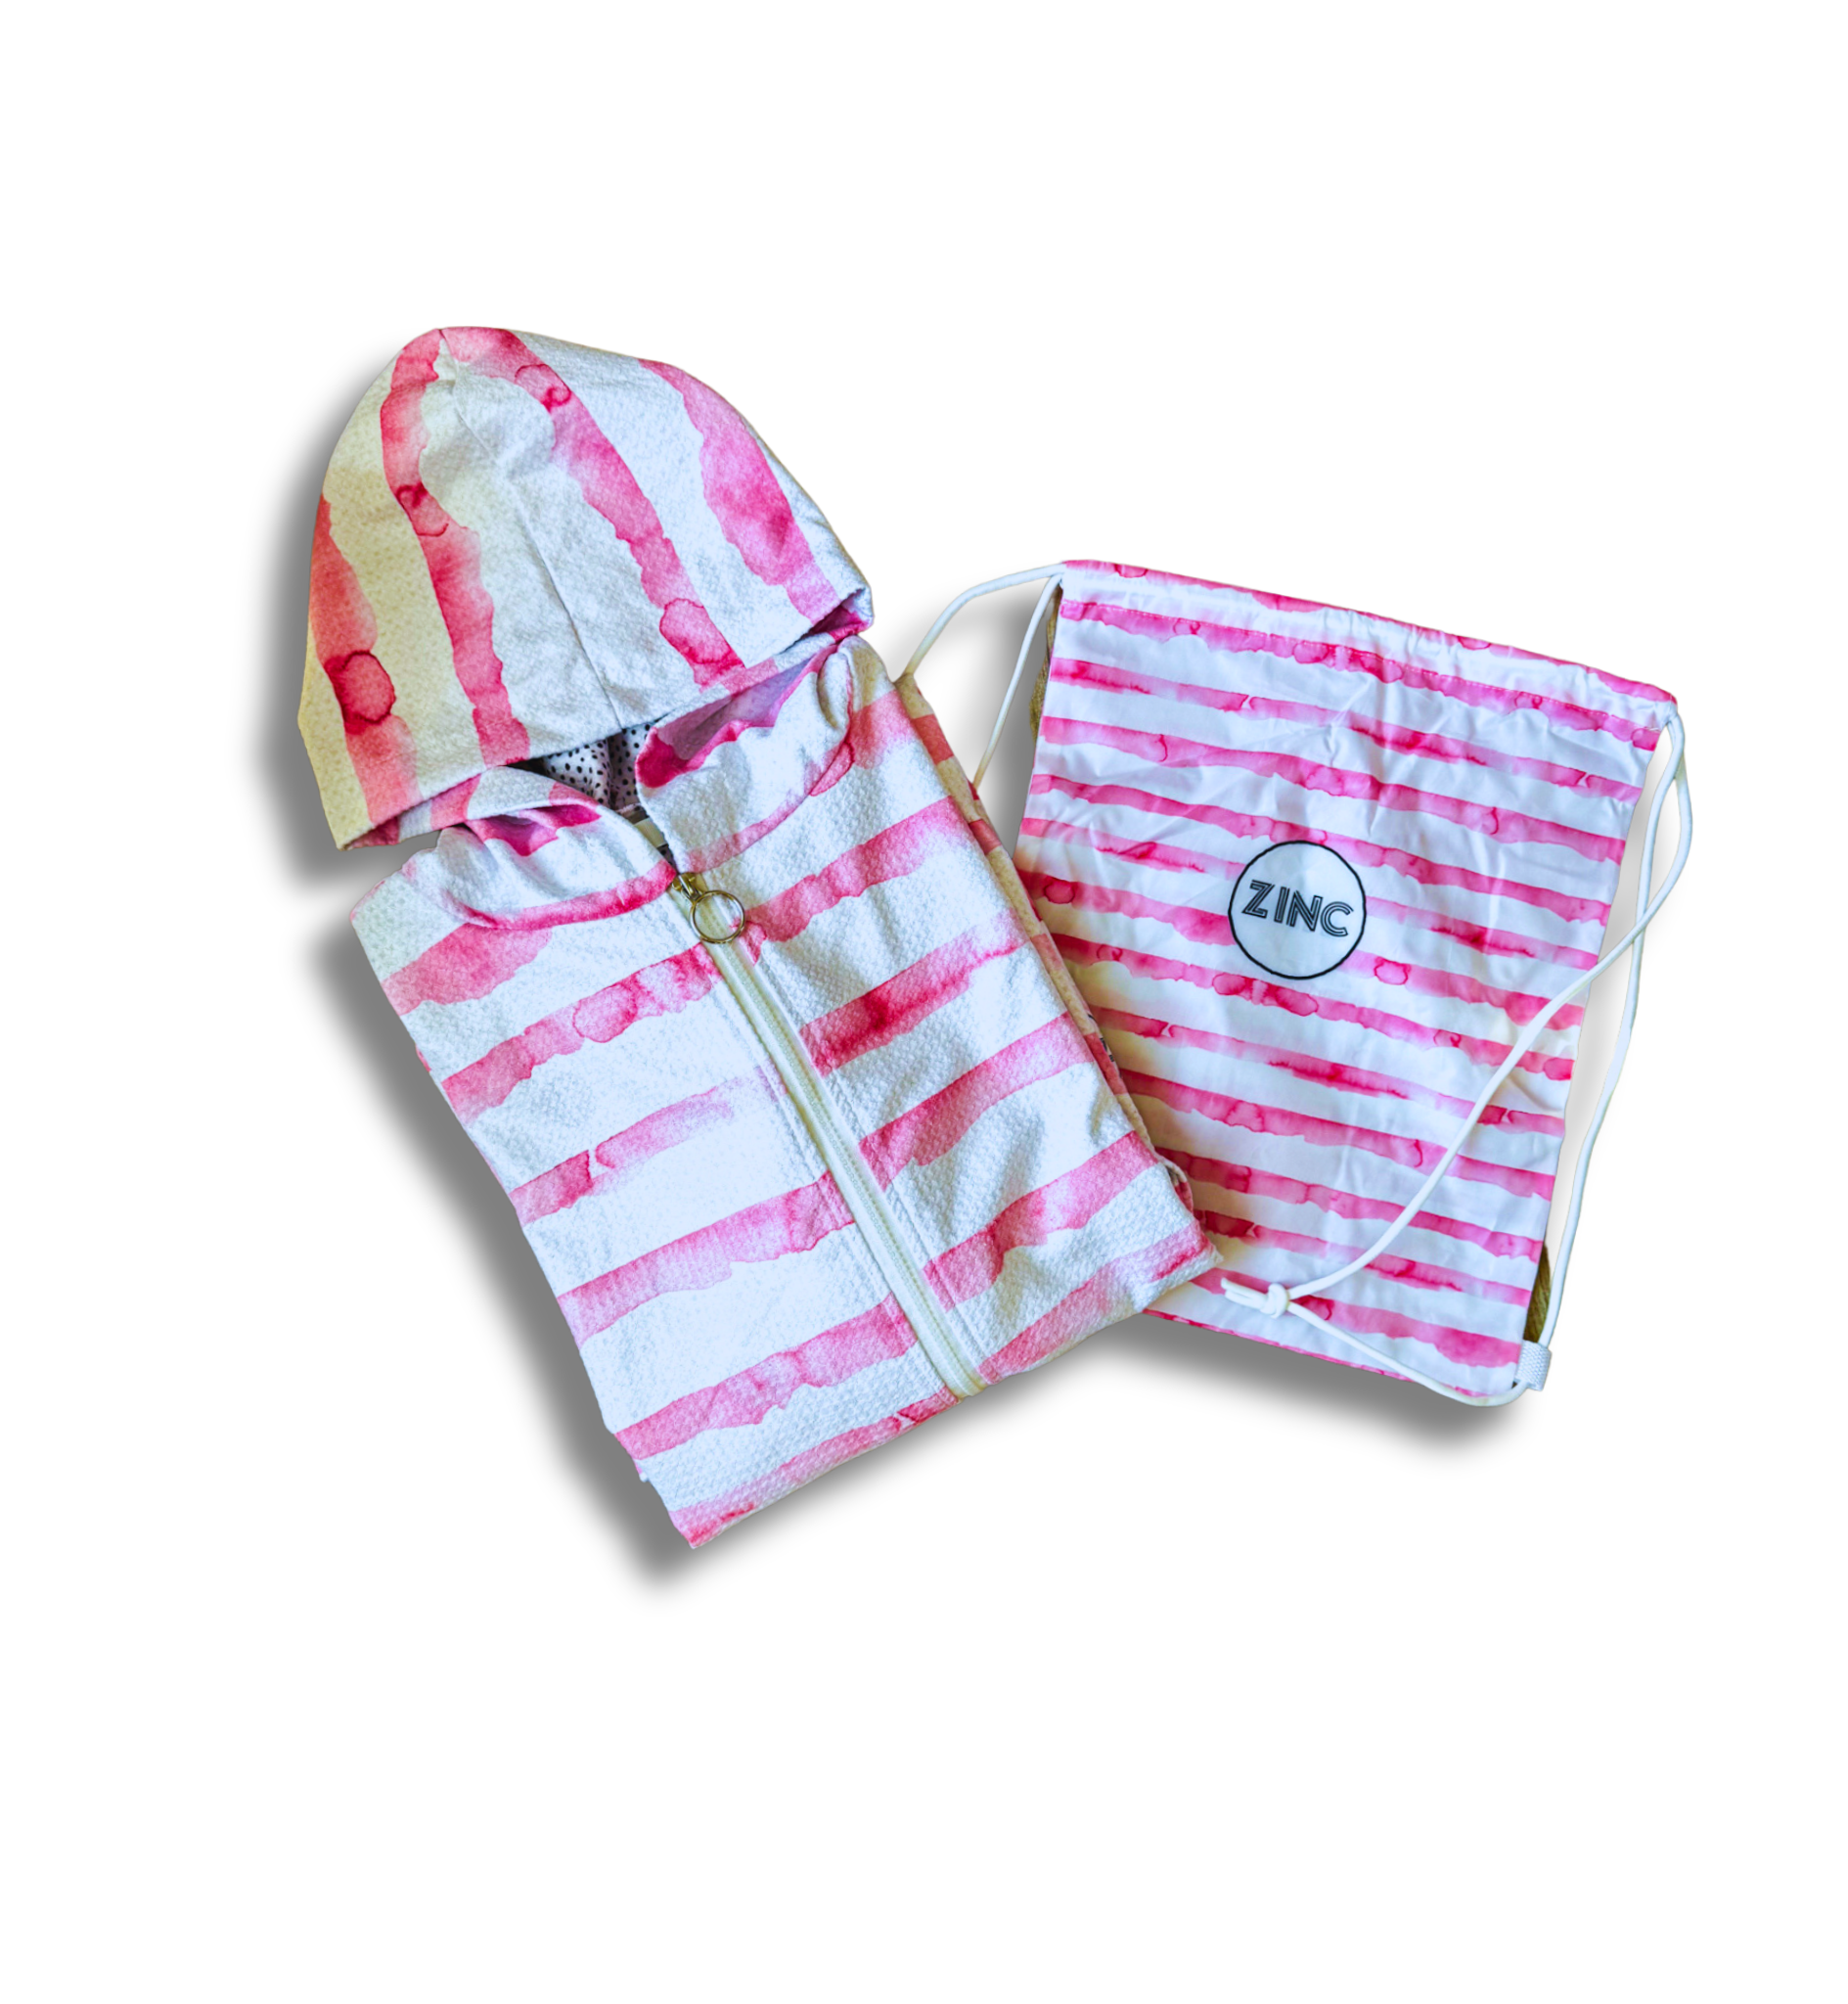 Medium ZIP UP Hooded Towel - French Beach Pink *PRE-ORDER DUE END MAY/JUNE*